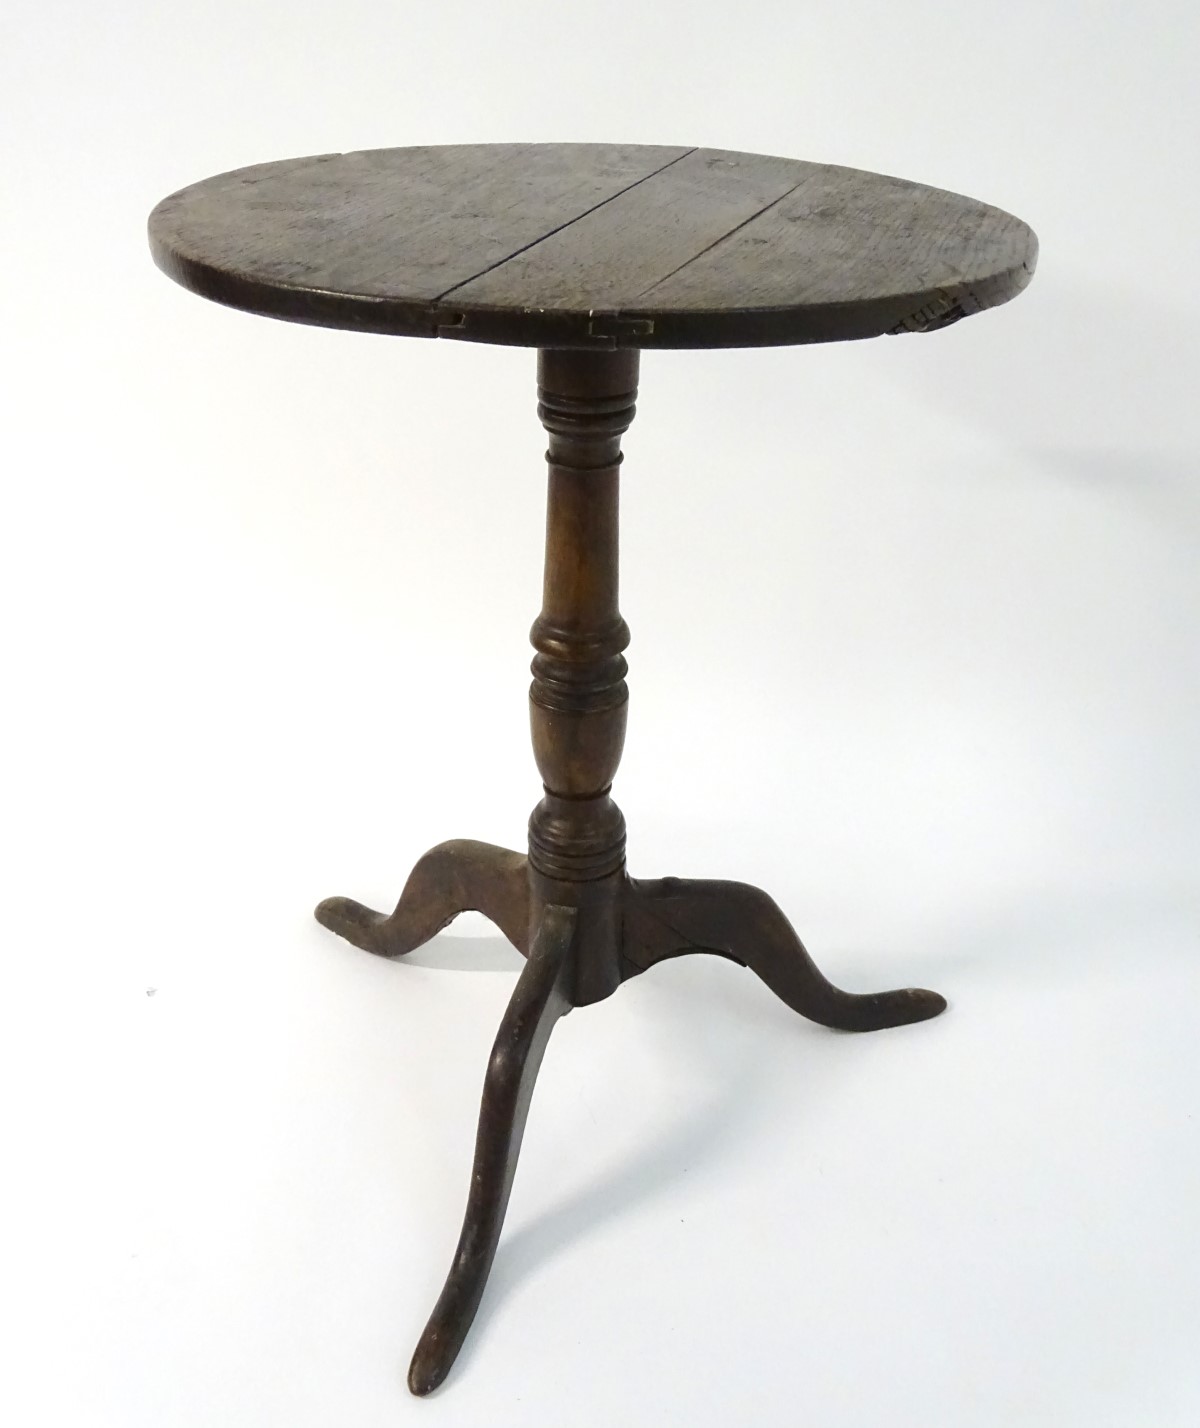 A late 18thC oak tripod table with a circular table top above a turned stem and standing on three - Image 7 of 7